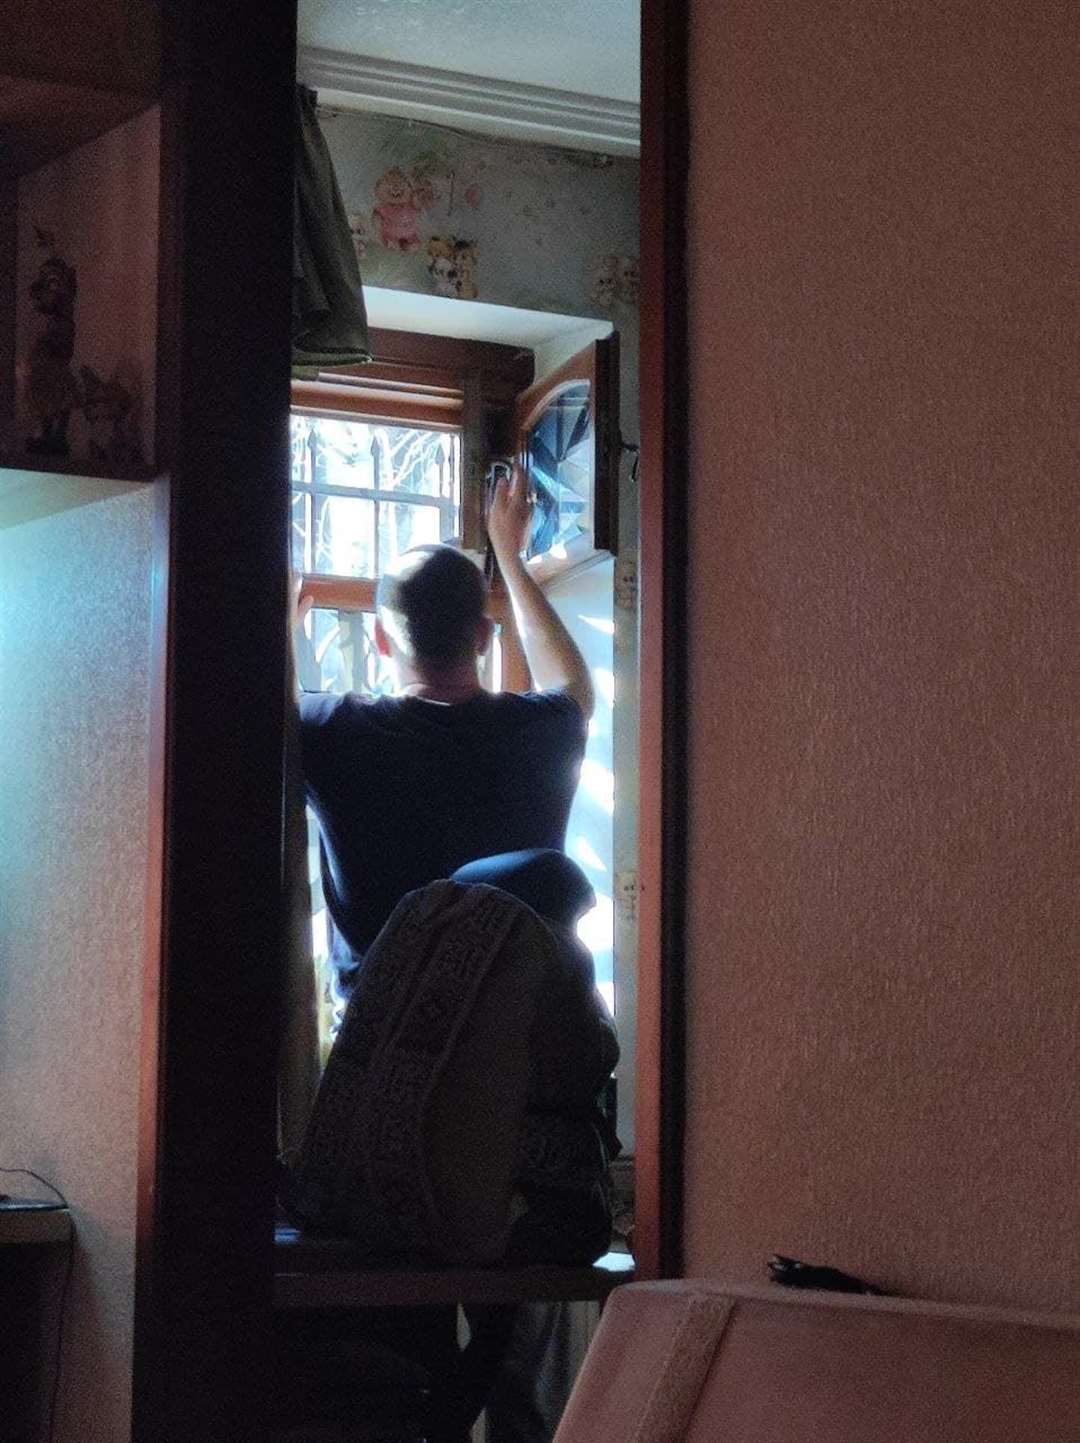 Ms Proskurnina’s father has taped the home’s windows to prevent being hit by shattered glass (Anna Proskurnina/PA)